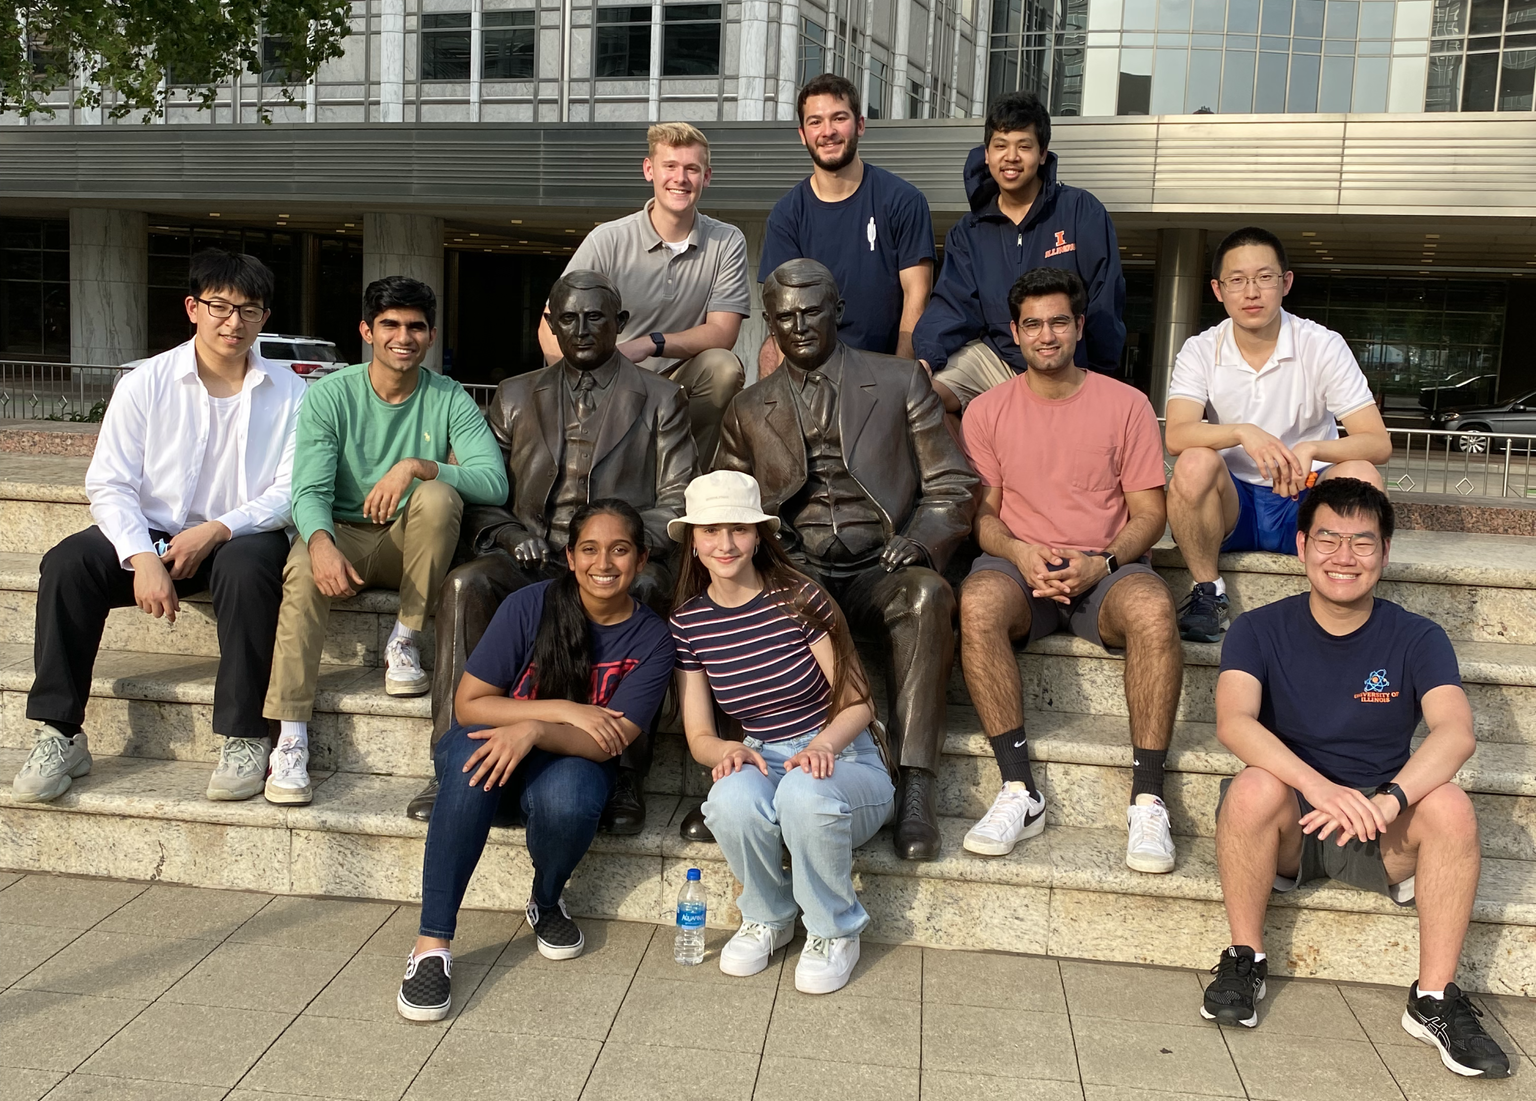 The 2022 Illinois SURF cohort pose around the Mayo Brothers statue outside Mayo Clinic in Rochester, MN